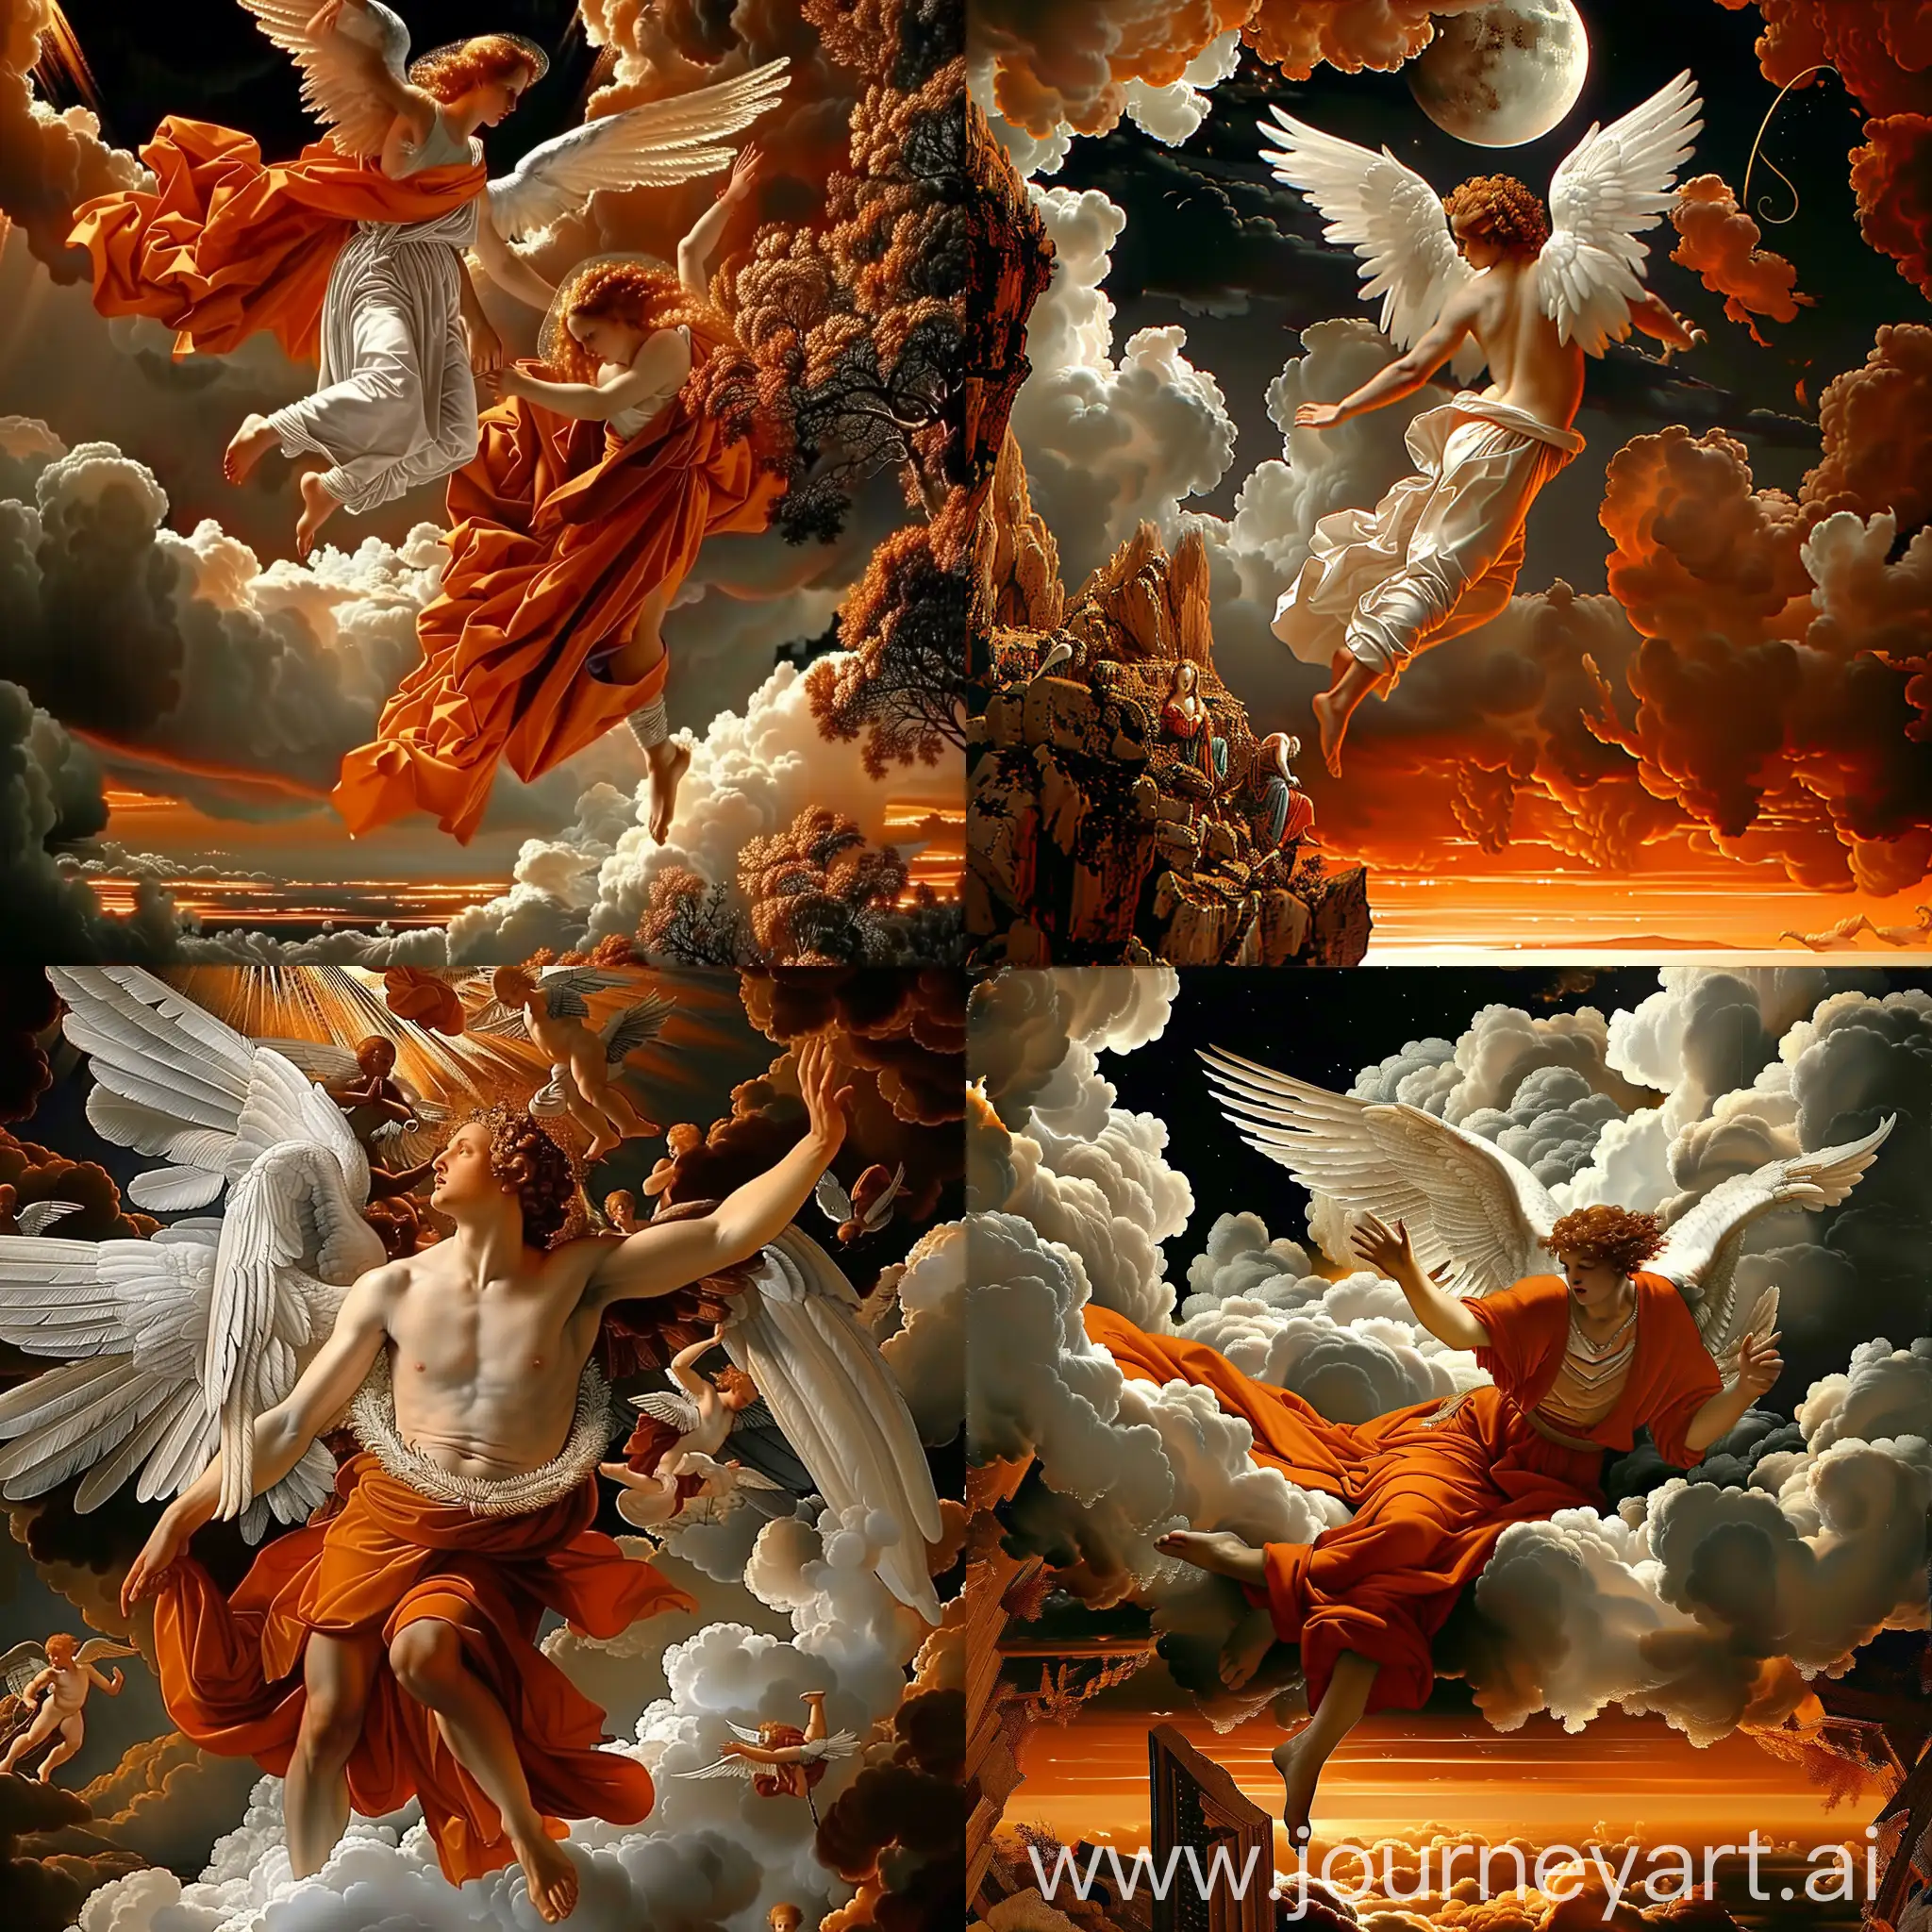 Renaissance-Art-The-Expulsion-of-an-Angel-from-Heaven